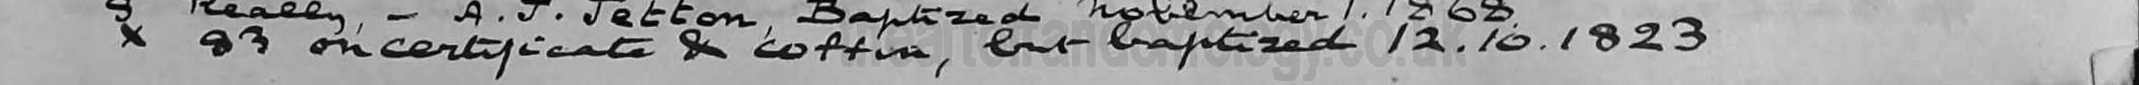 Mary Ann Messingham burial 1903: footnote